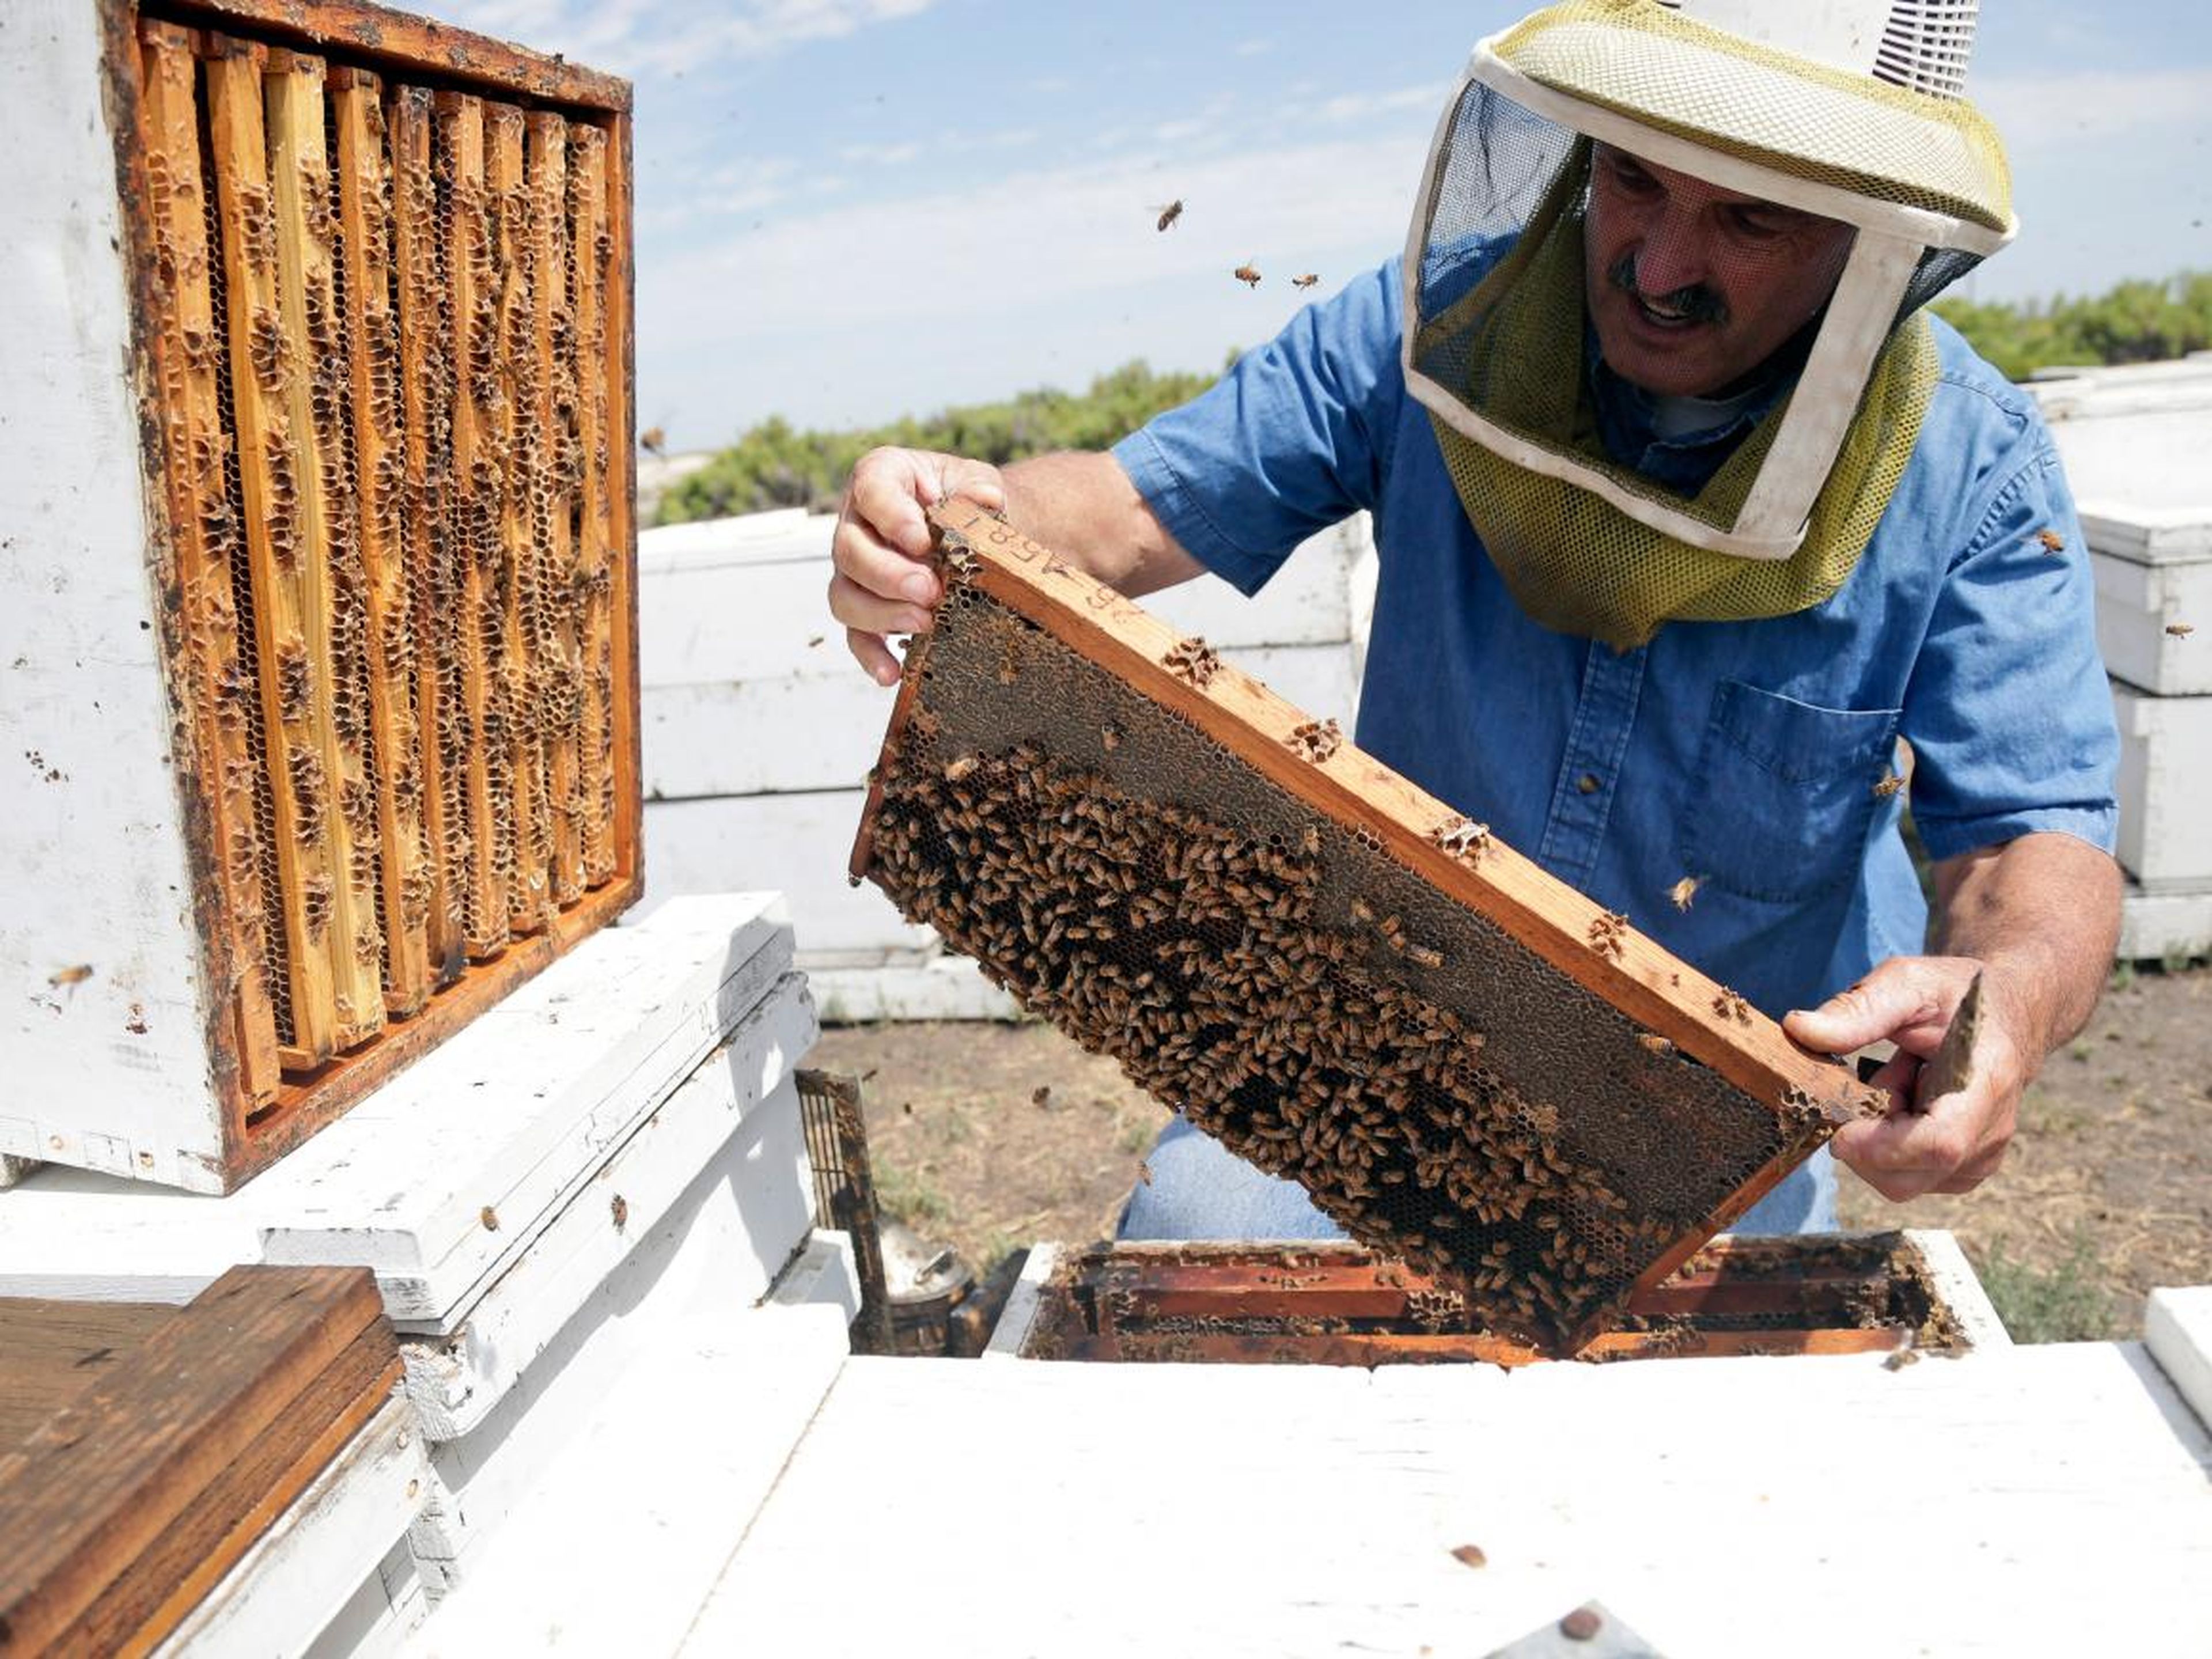 A California beekeeper inspects his honey beehive.